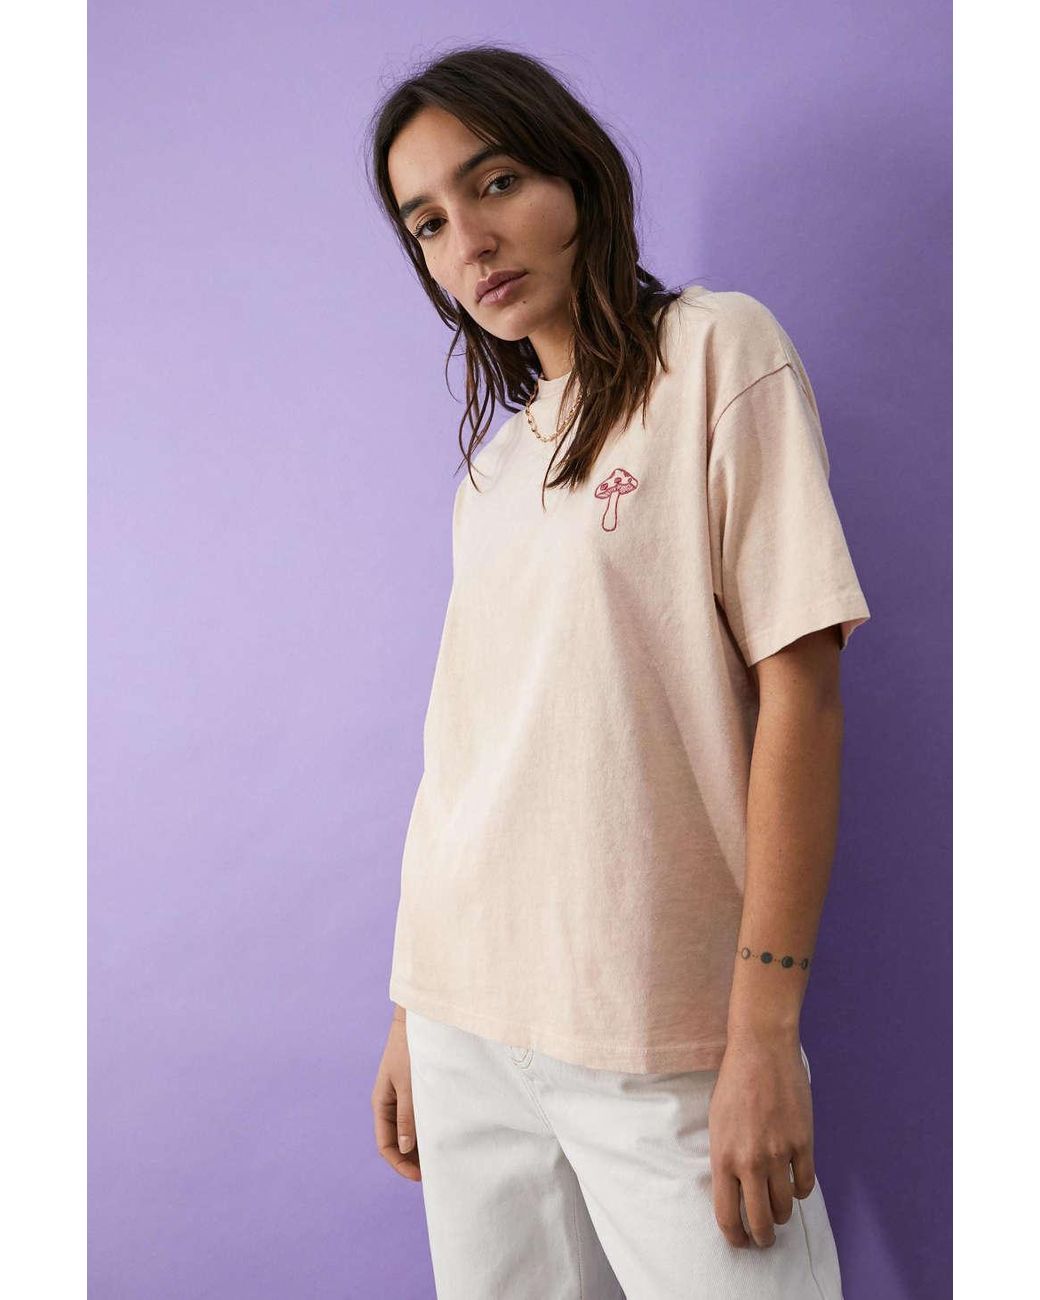 Urban Outfitters Cotton Uo Washed Sunshine Boyfriend Tee in Pink - Lyst